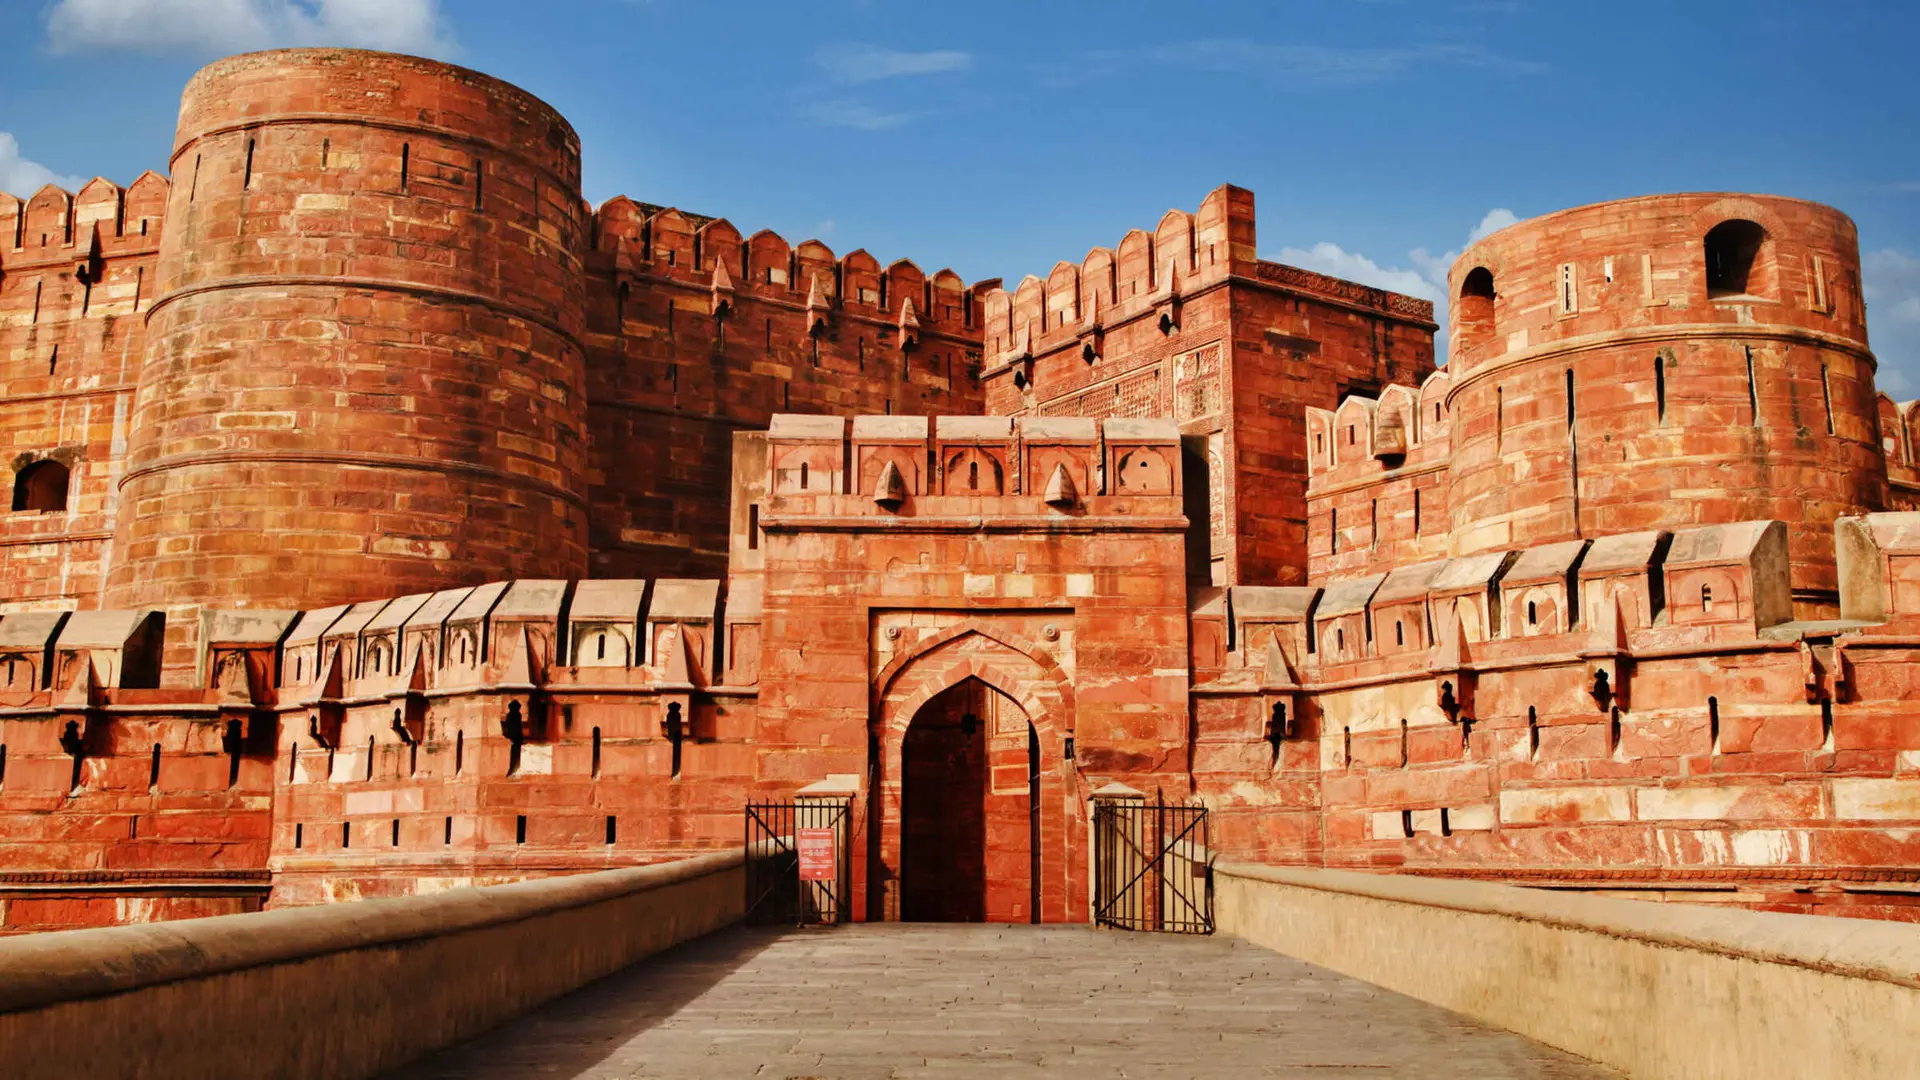 Destinations Articles - Agra Travel Guide